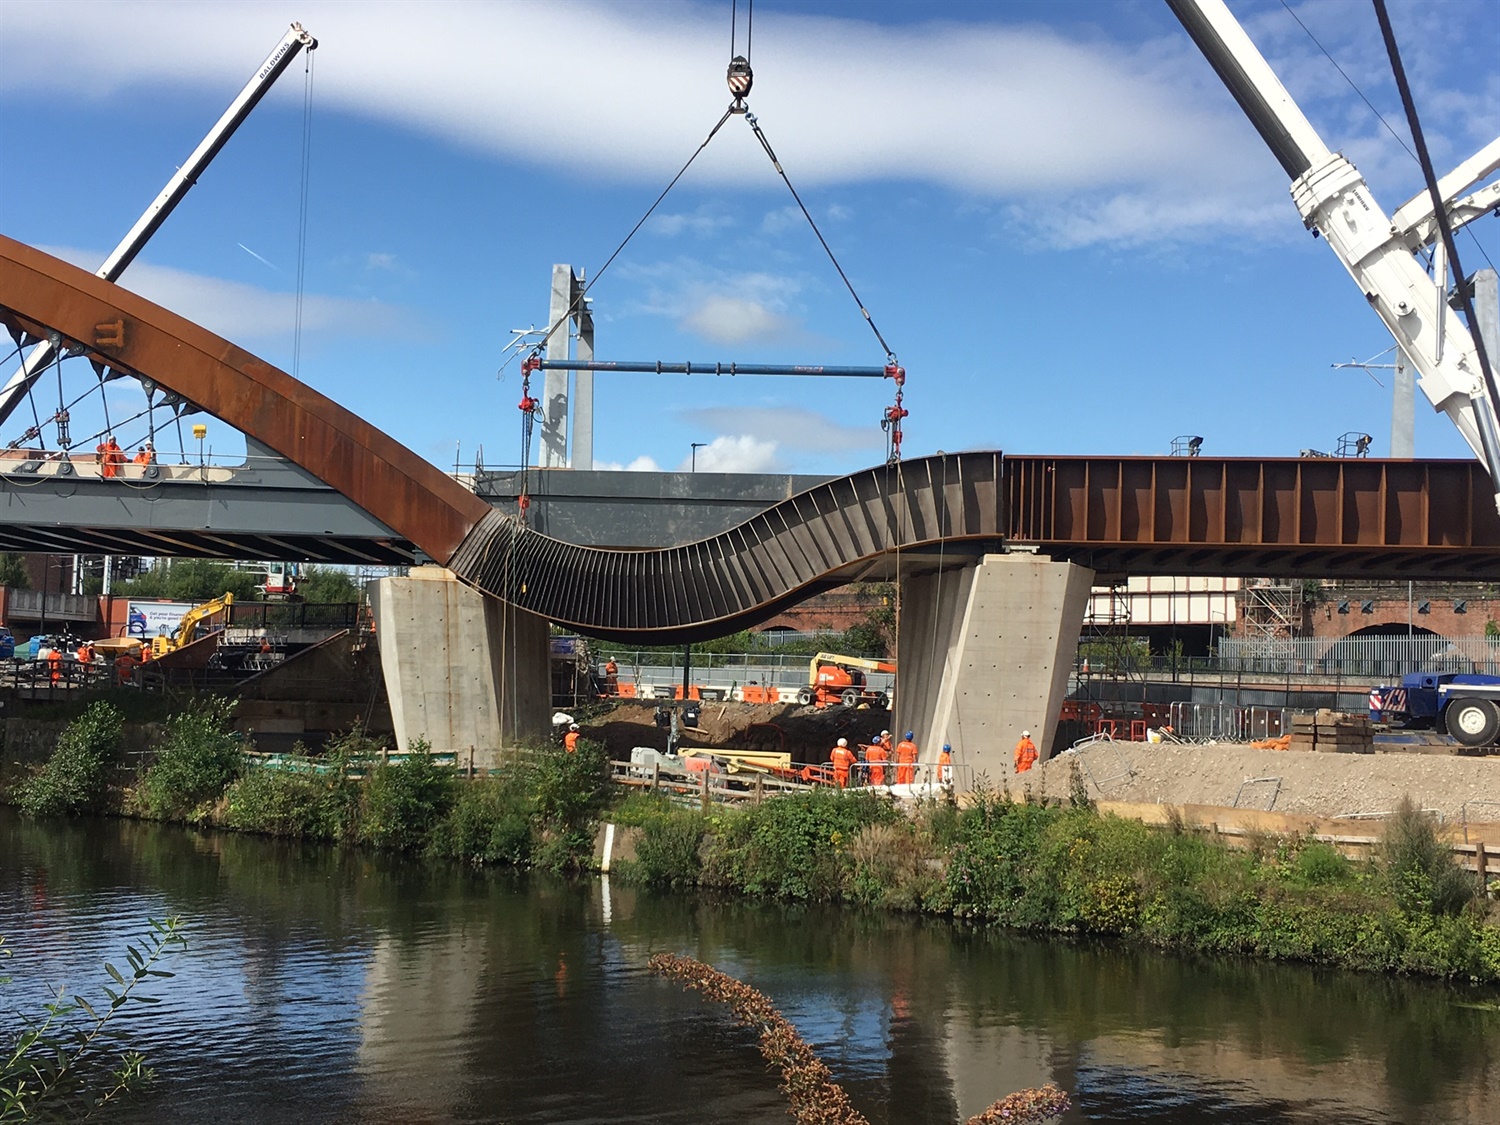 Ordsall Chord close to completion as steel bands installed